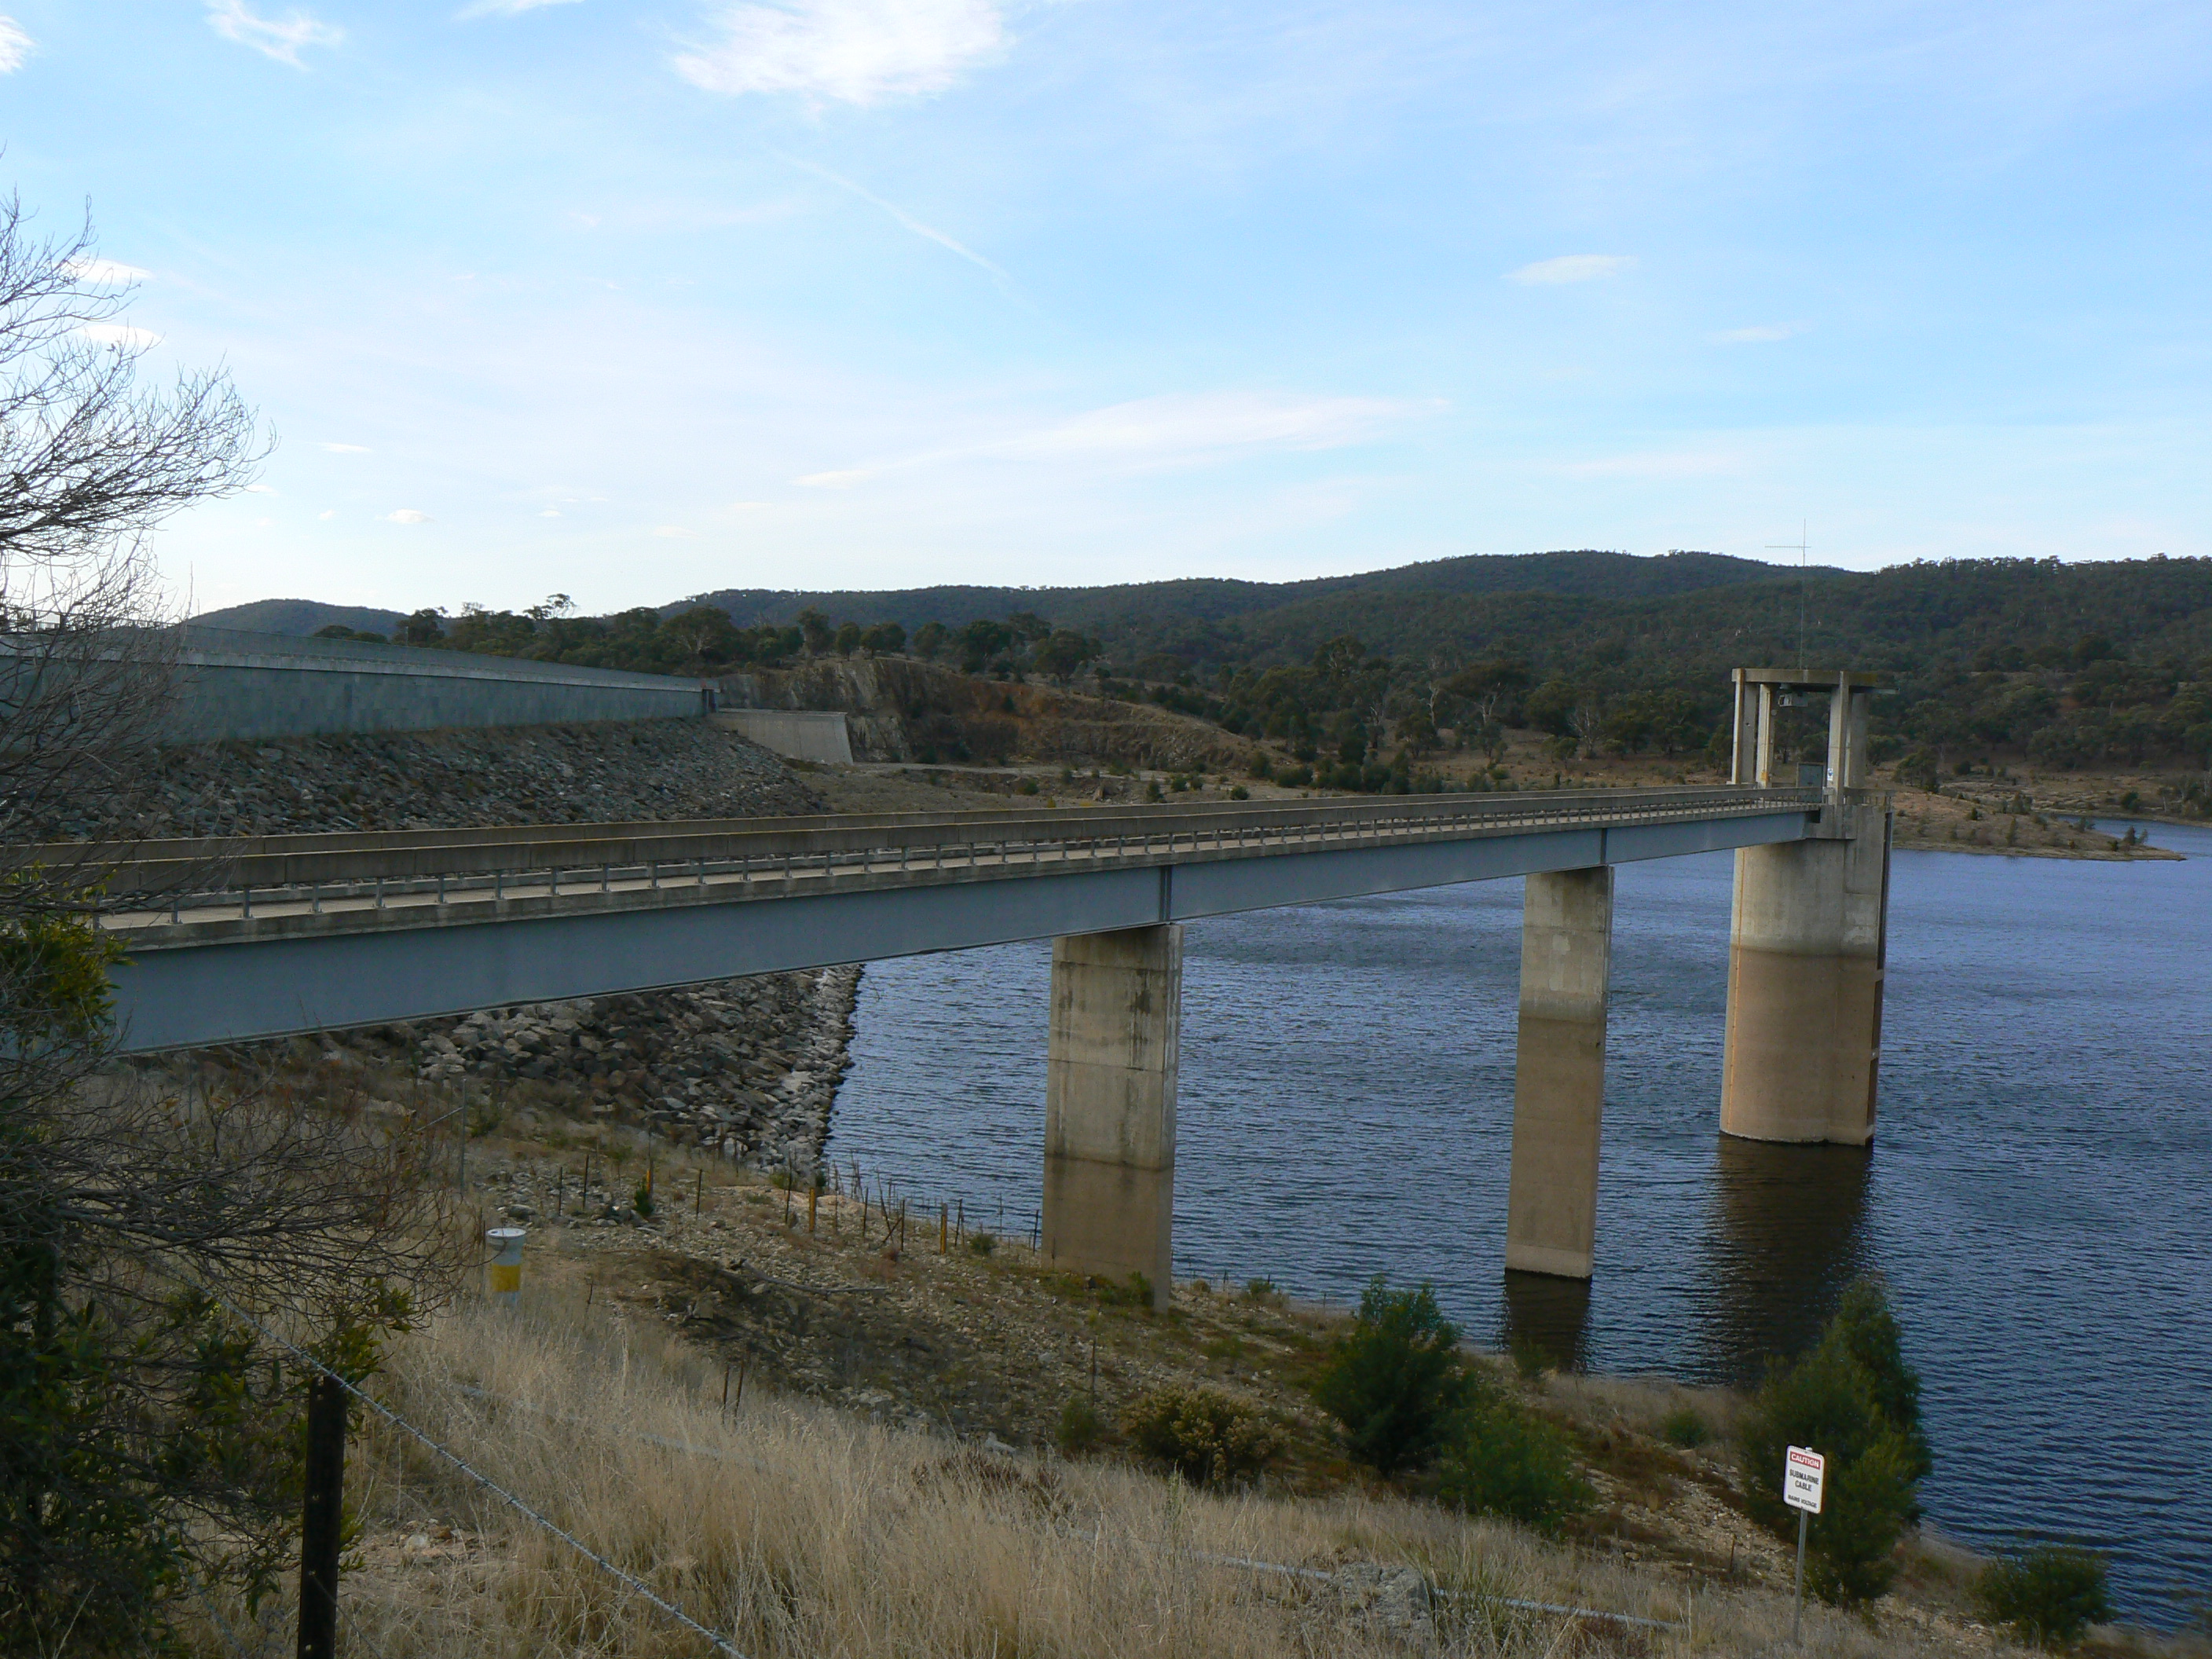 The outlet tower, with the dam wall in the background.